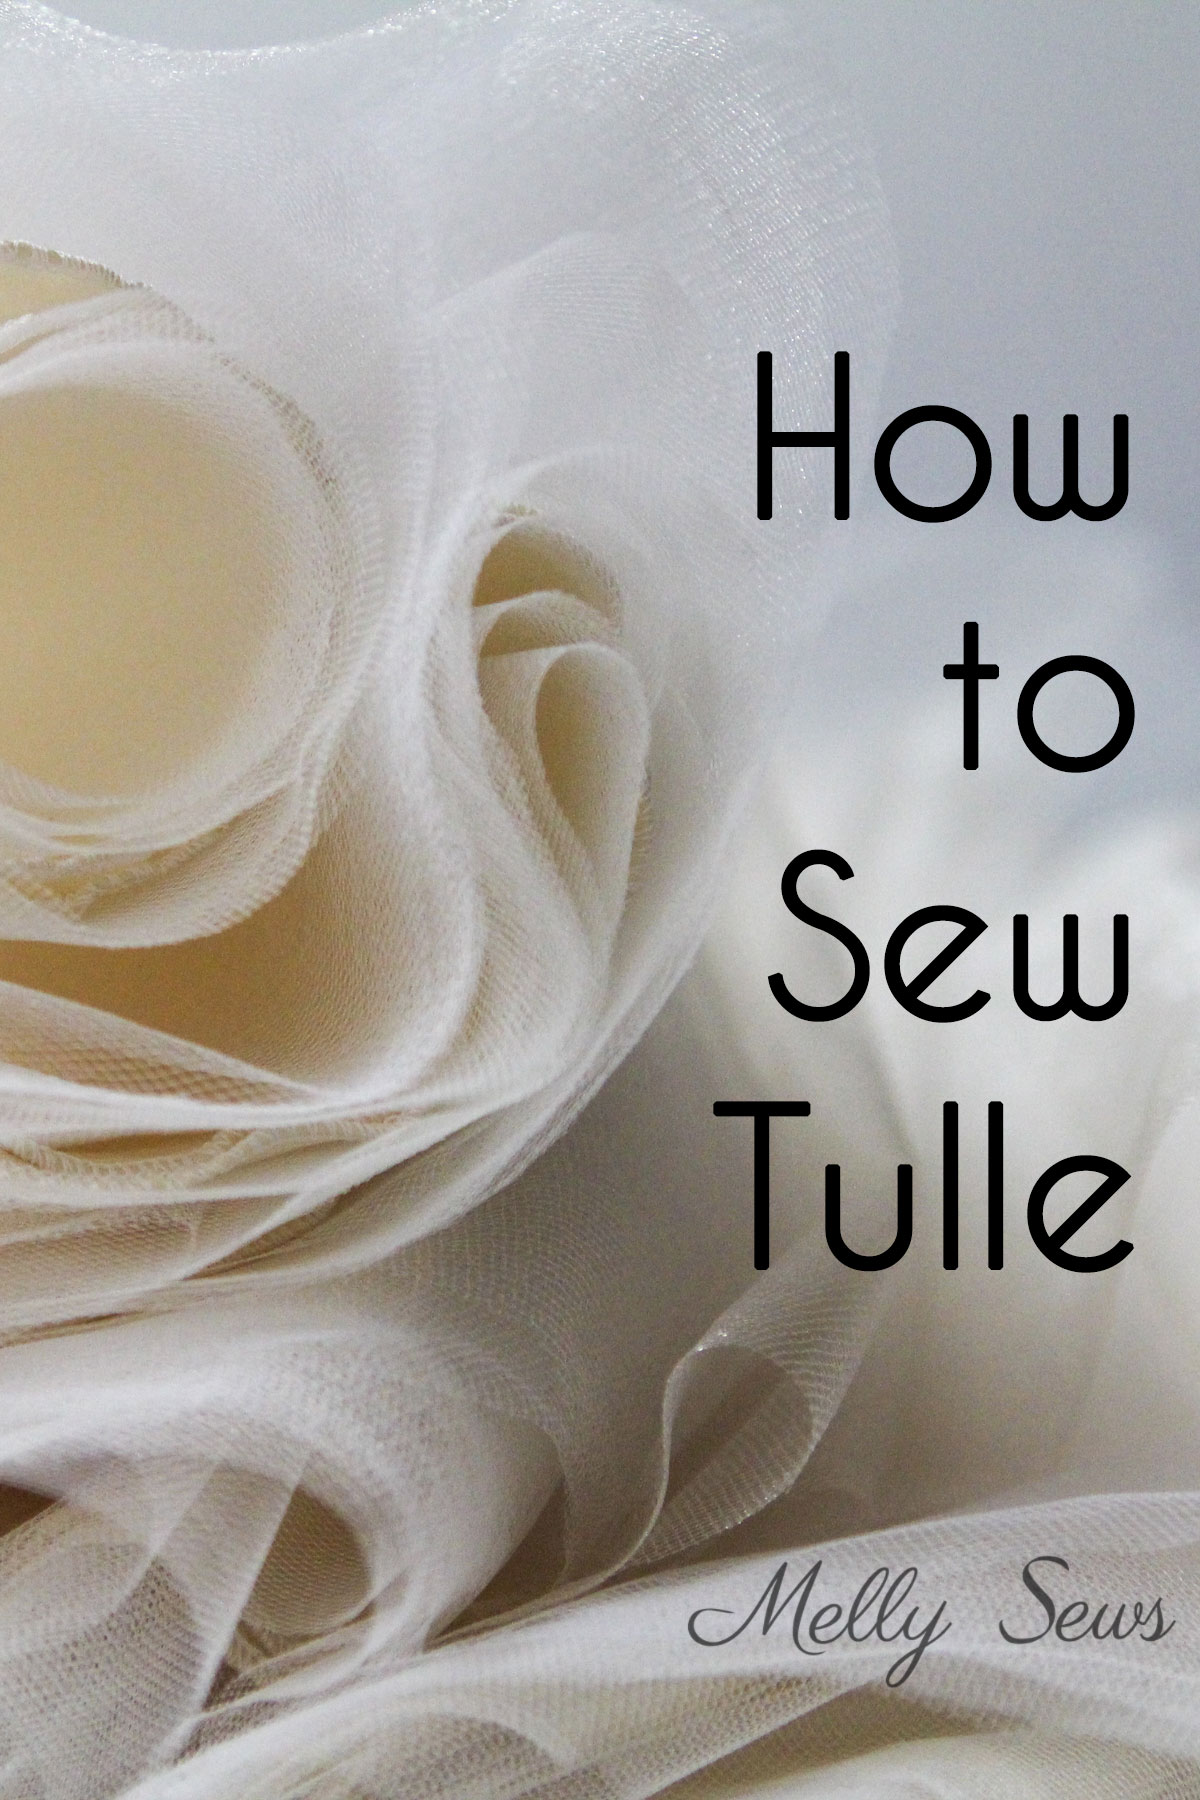 How to make a tulle skirt in 10 simple steps - I Can Sew This